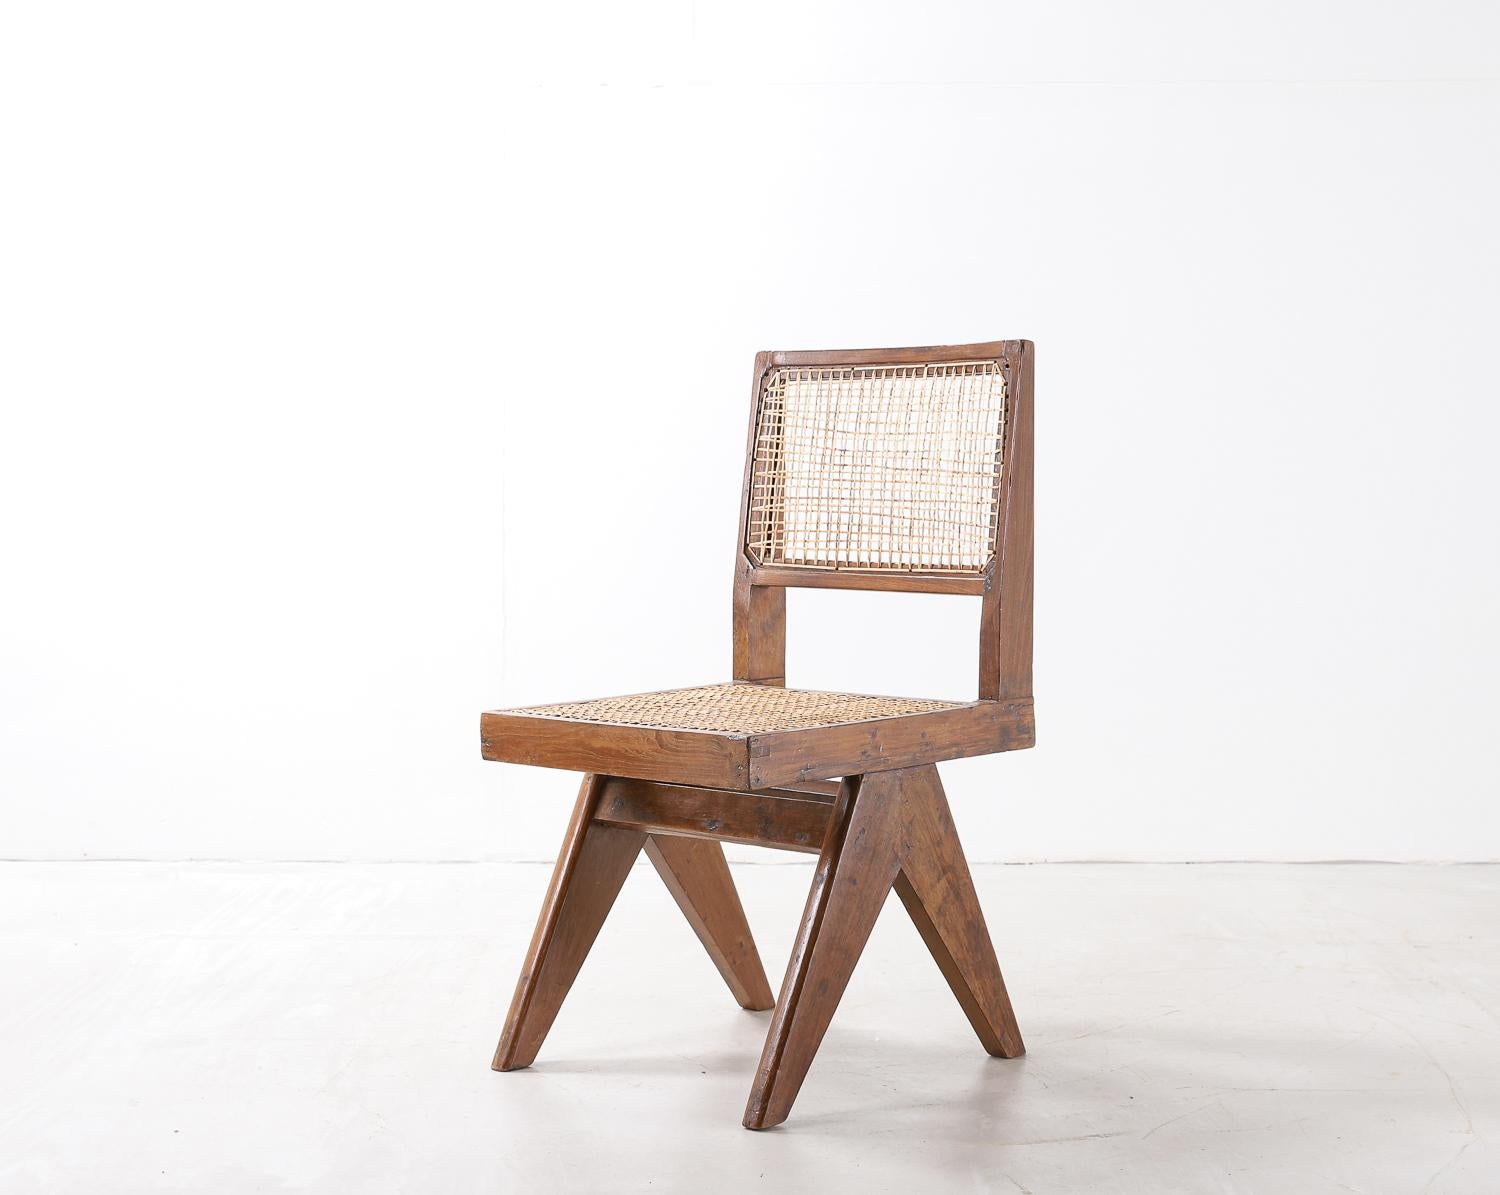 Pierre Jeanneret chair, circa 1958-1959. Teak and rattan. Intended for: University of Punjab, Chandigarh, India.